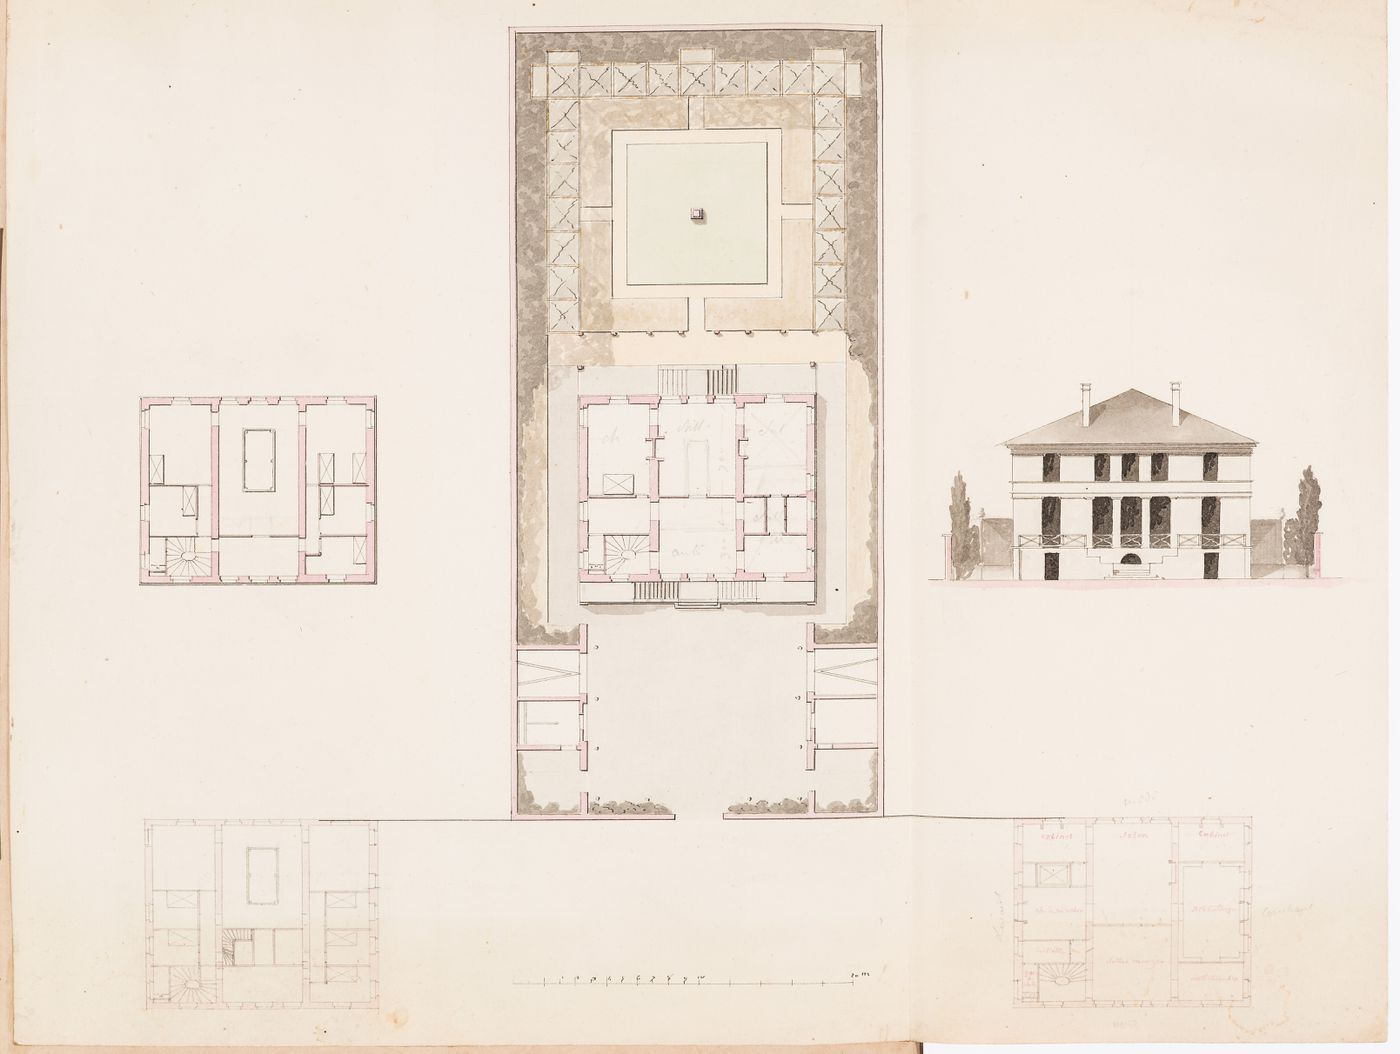 Front elevation, site plan, and ground and first floor plans for a house and garden on rue d'Aguesseau, Paris; verso: Sketch plan for a house on rue d'Aguesseau, Paris